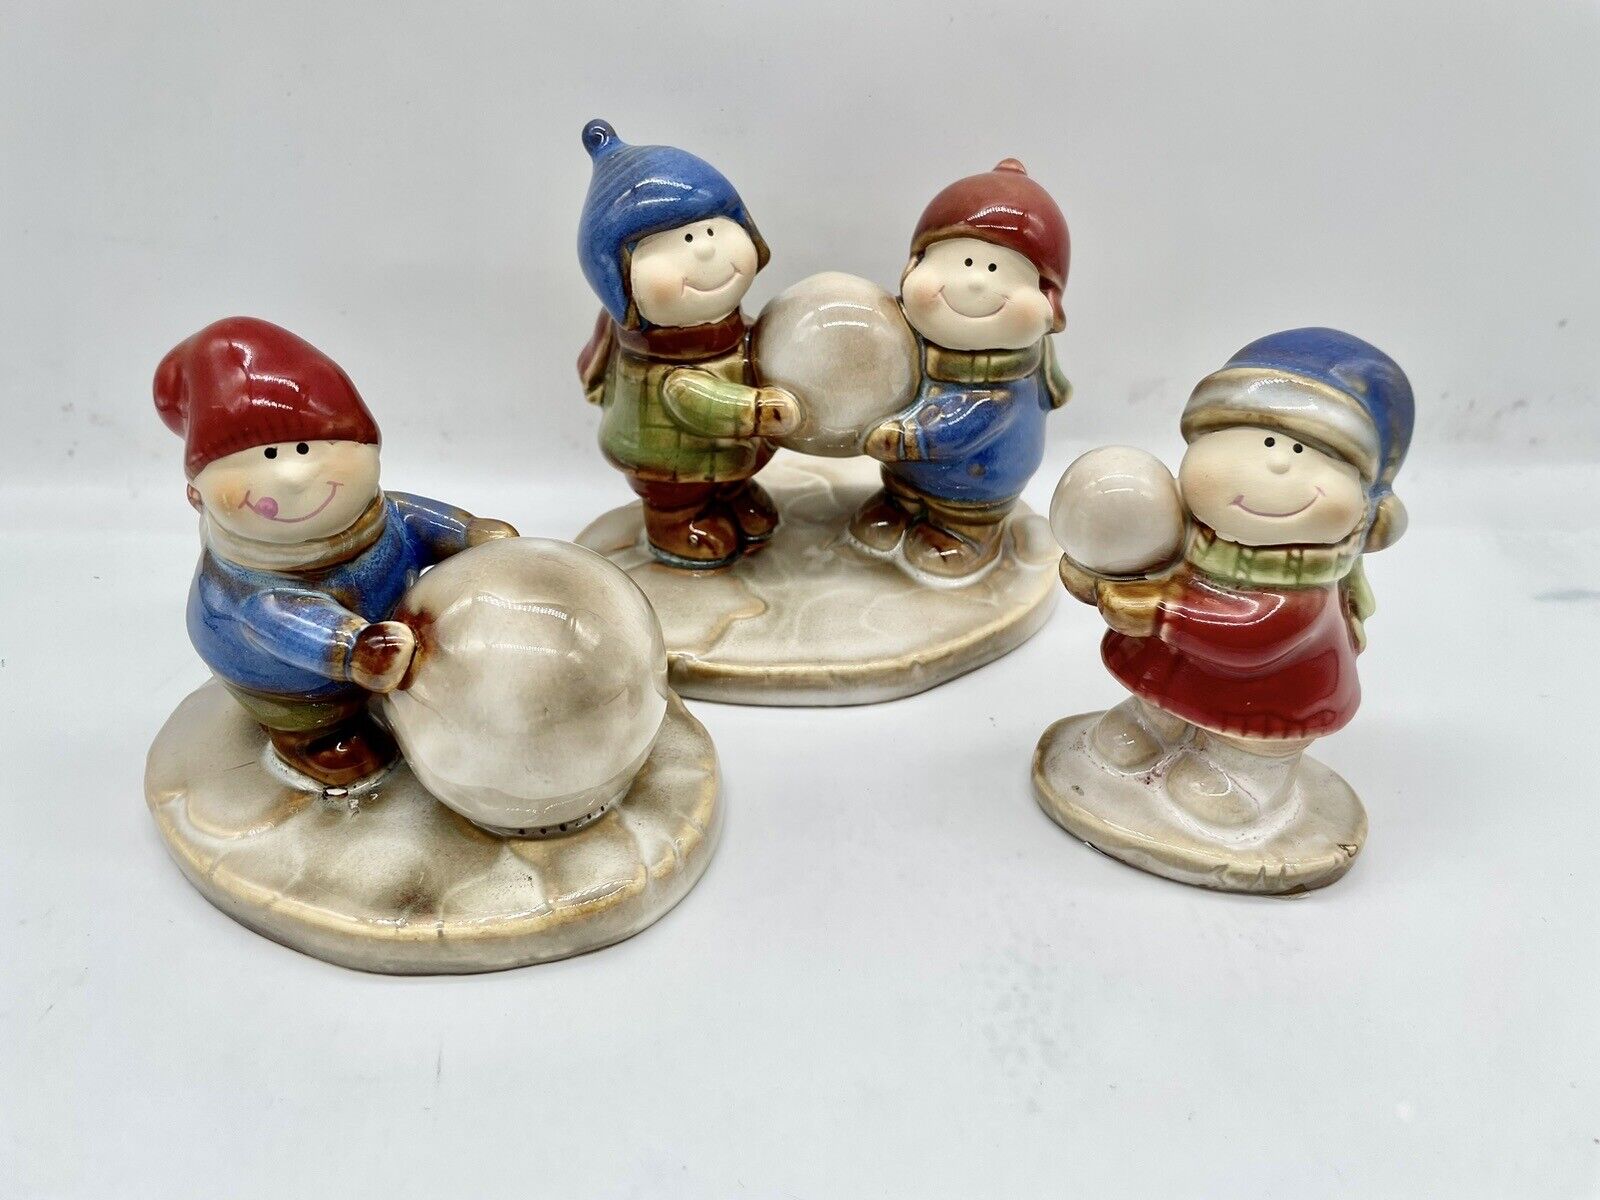 3 CHRISTMASVILLE FIGURINES by RONNIE WALTER for COYNE\'S & COMPANY 2004 Adorable 